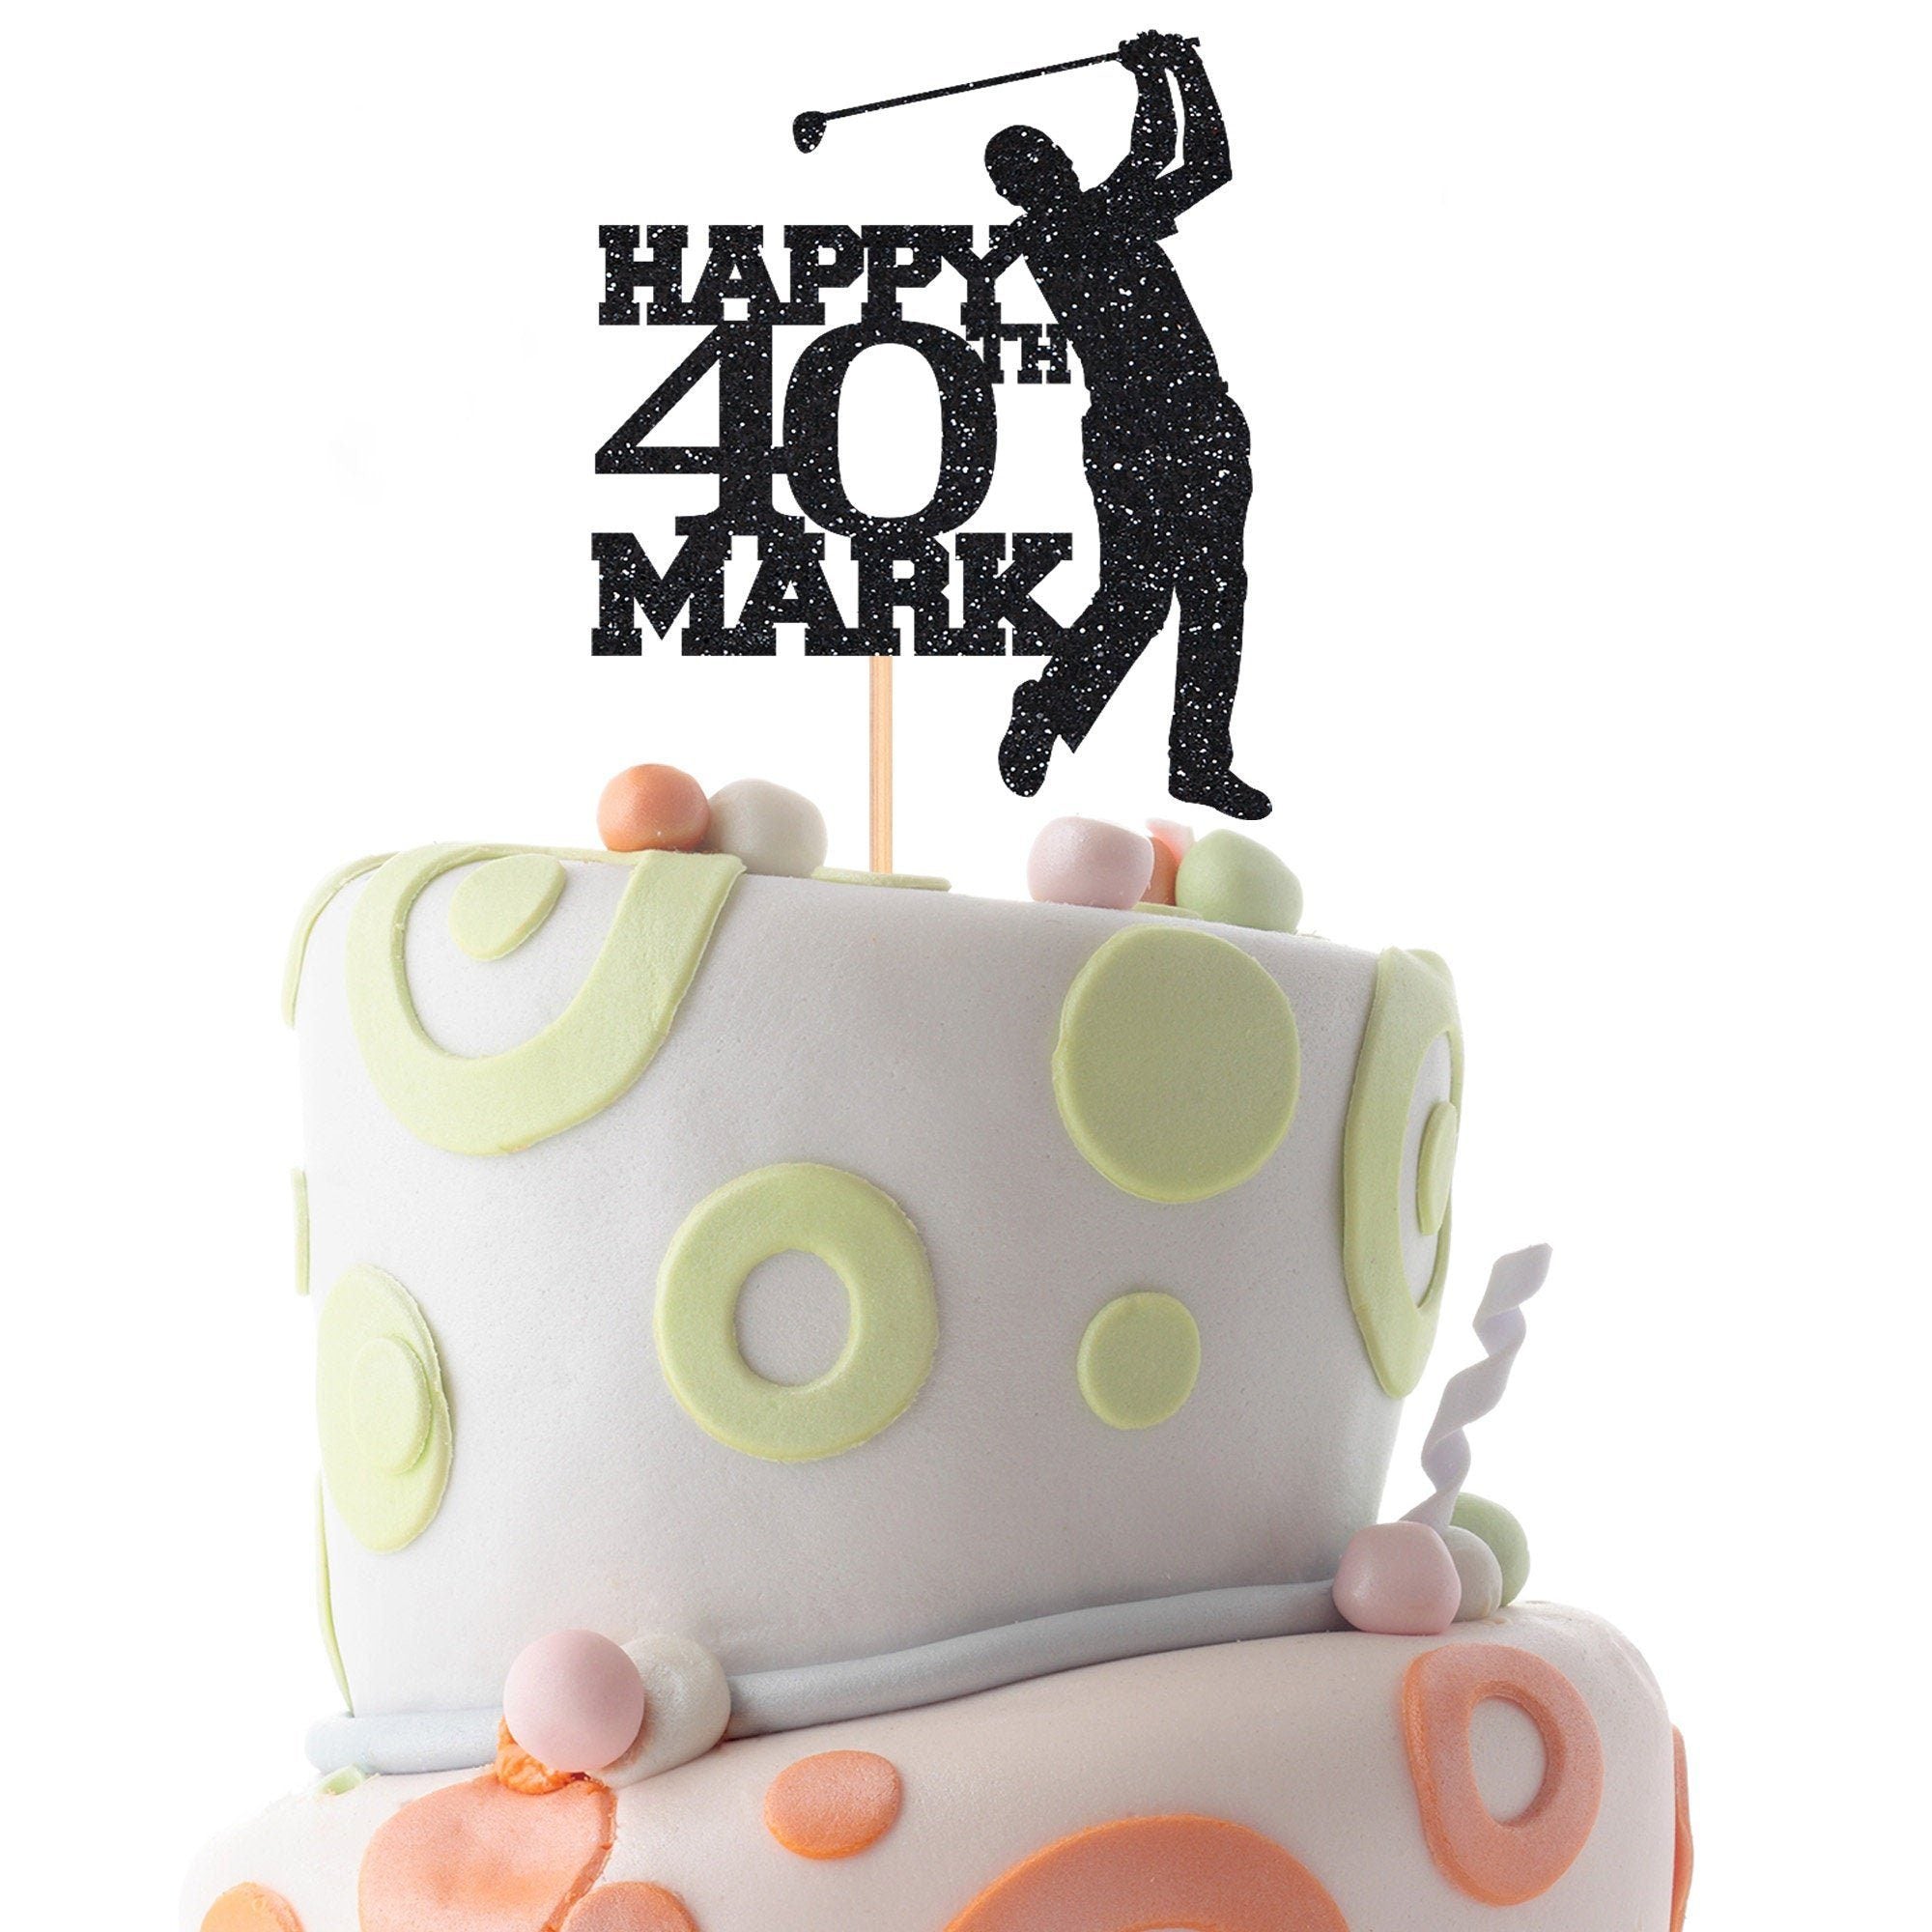 Personalised golf birthday cake topper with name and age, Golf themed